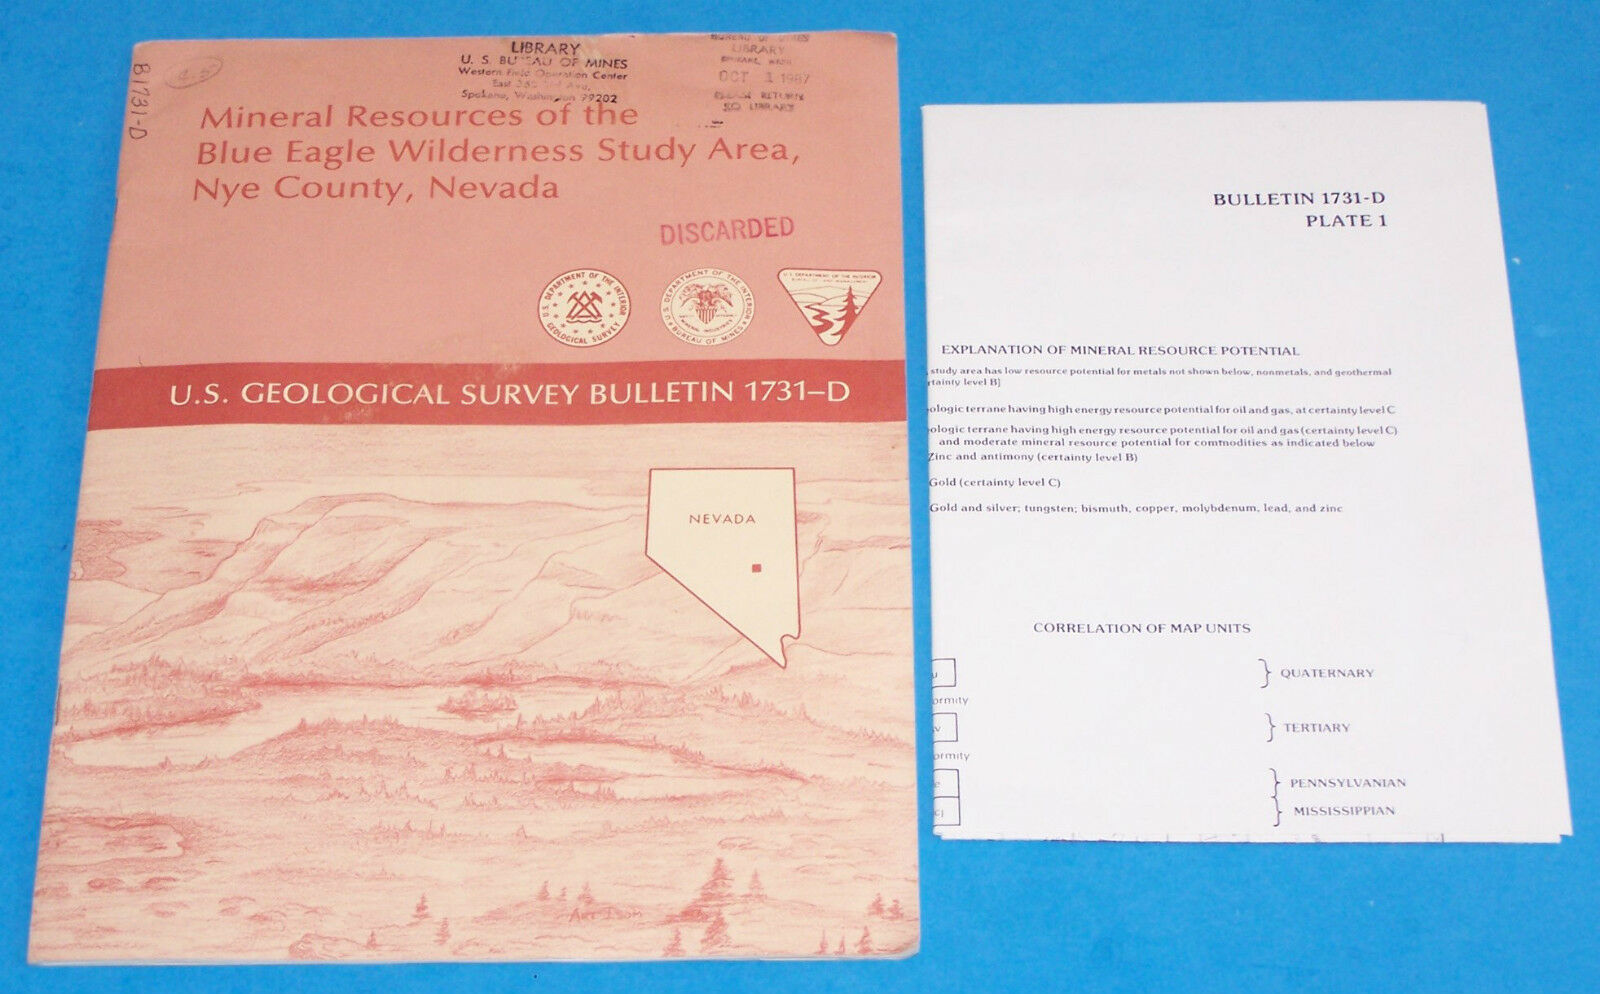 1986 Usgs Bulletin 1731d - Mineral Resources - Blue Eagle, Nye County, Nevada